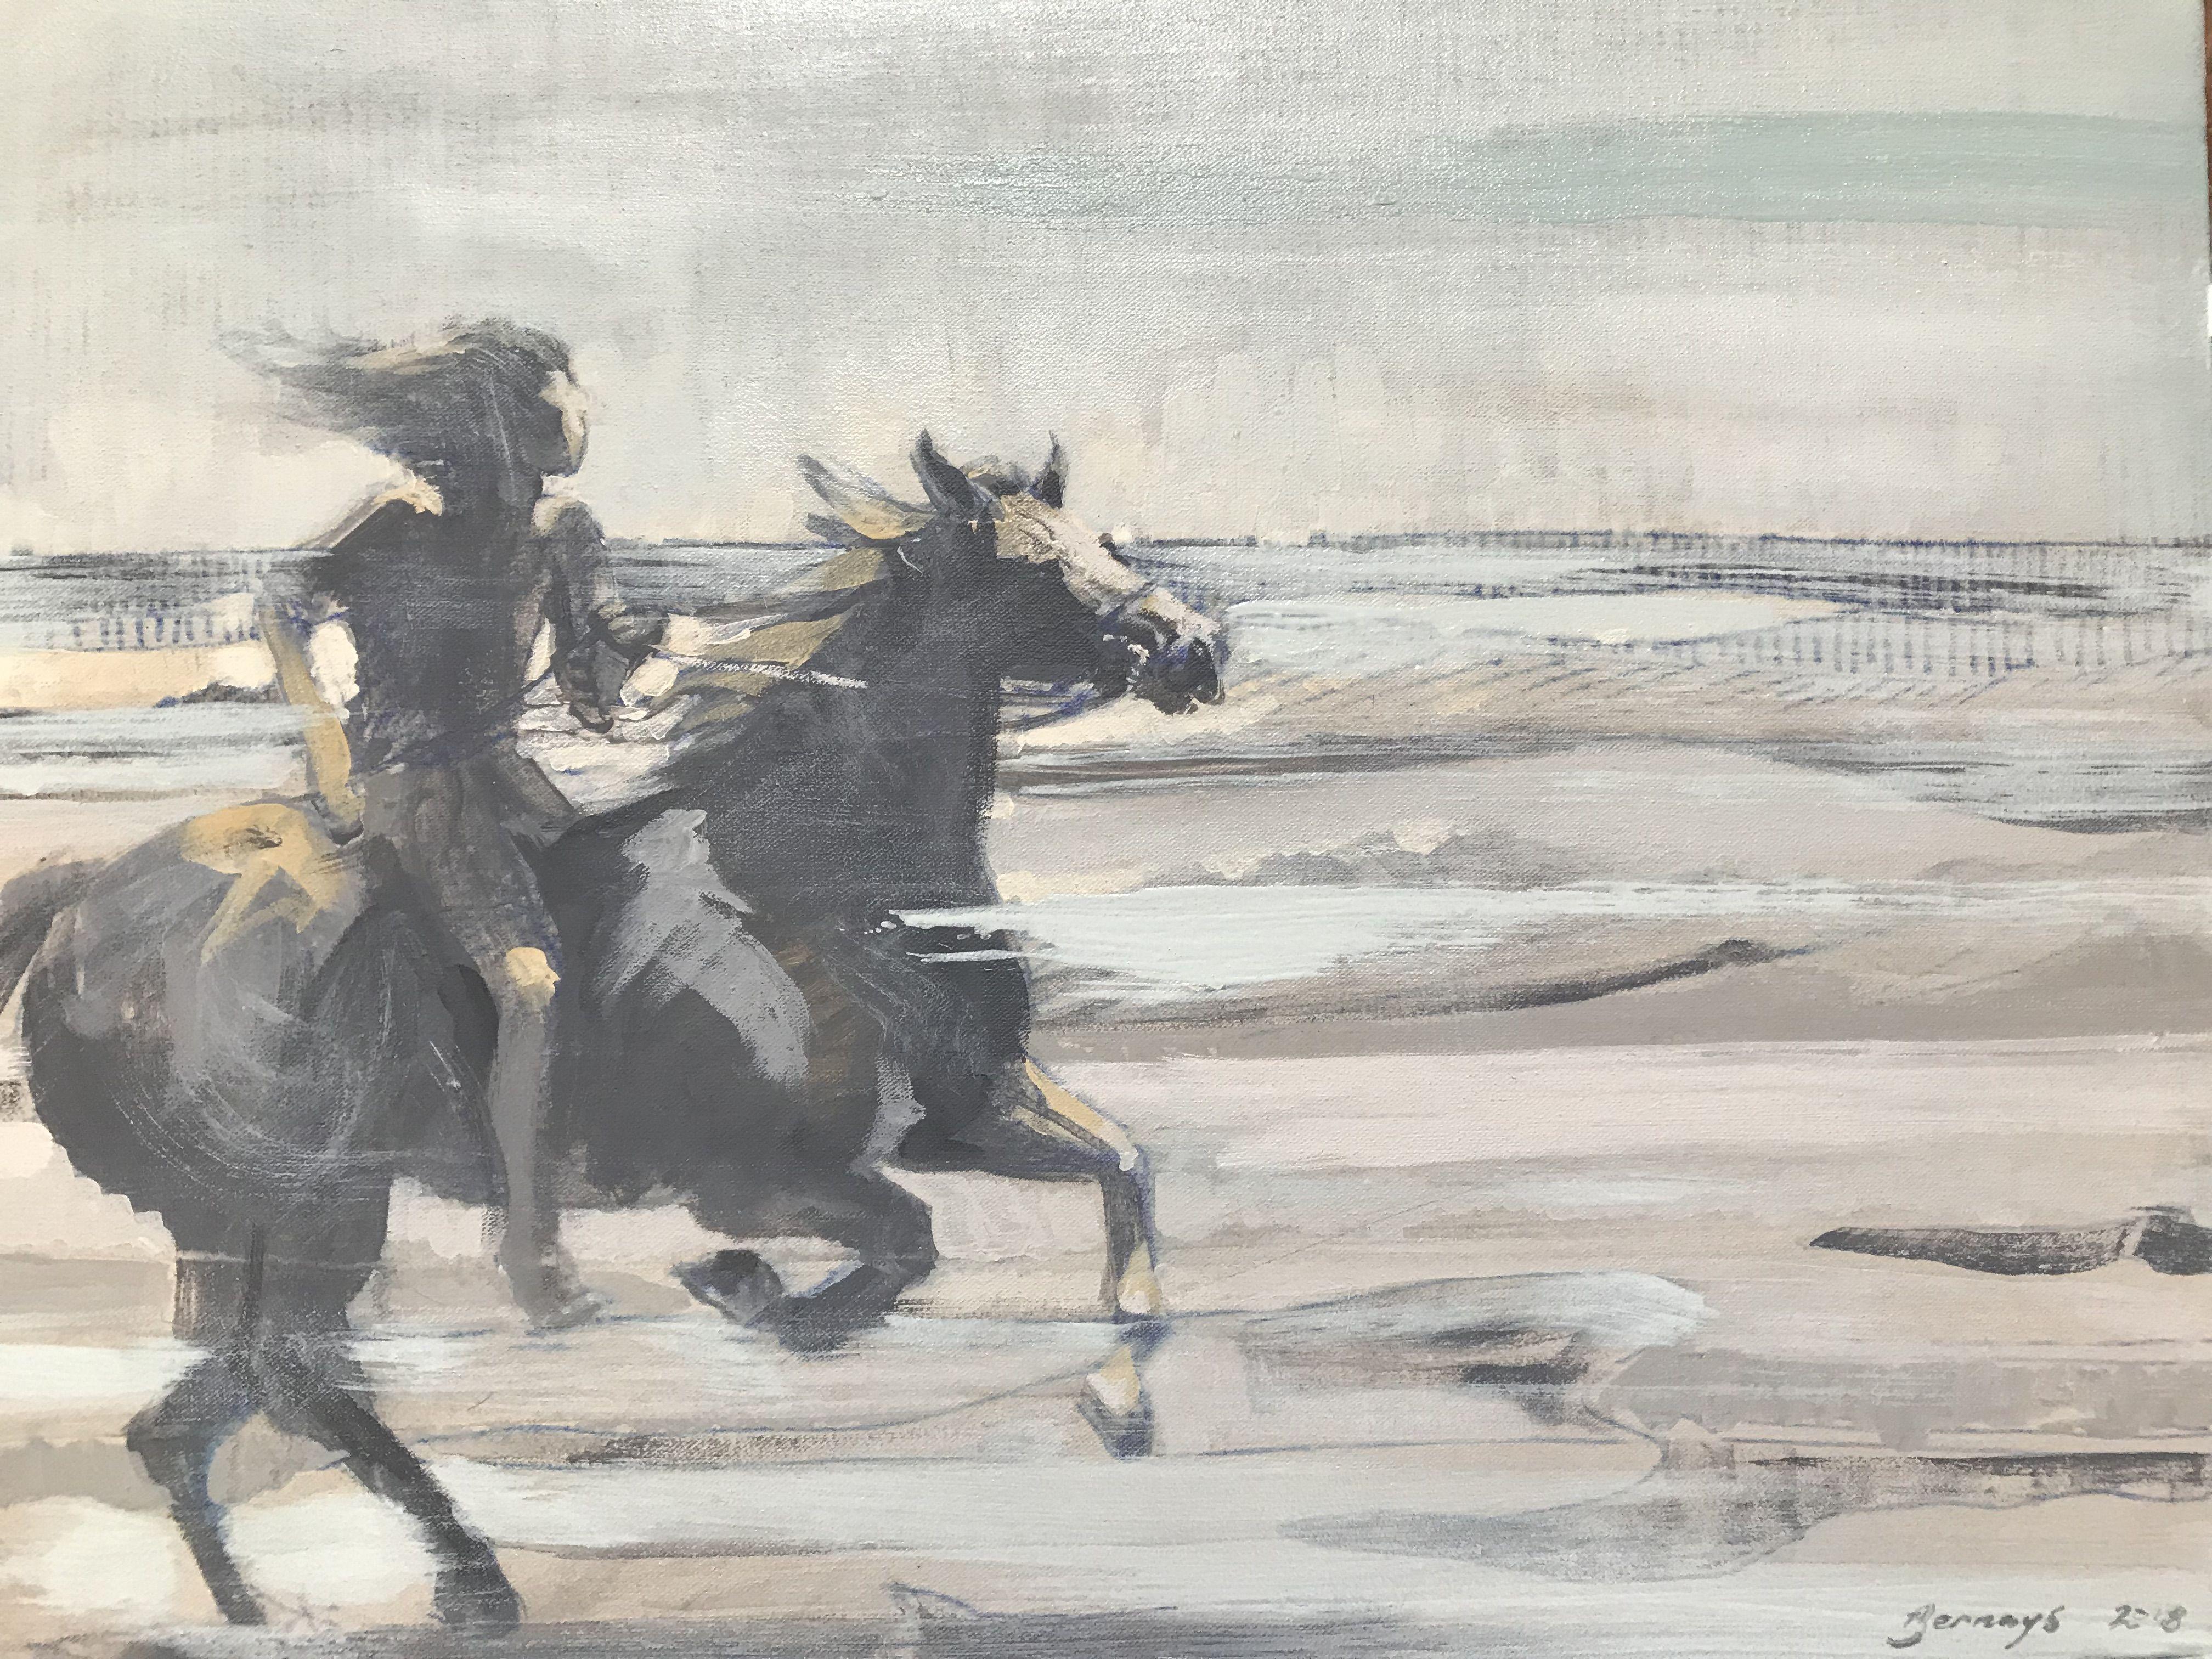 the spray and the wind and the wet coat of my horse where one salty breath. I galloped in the cold, I felt the tassels of wet hair and the rhythm of the hooves in wet sand. This is changed, augmented, a pattern based on the memory.  :: Painting ::